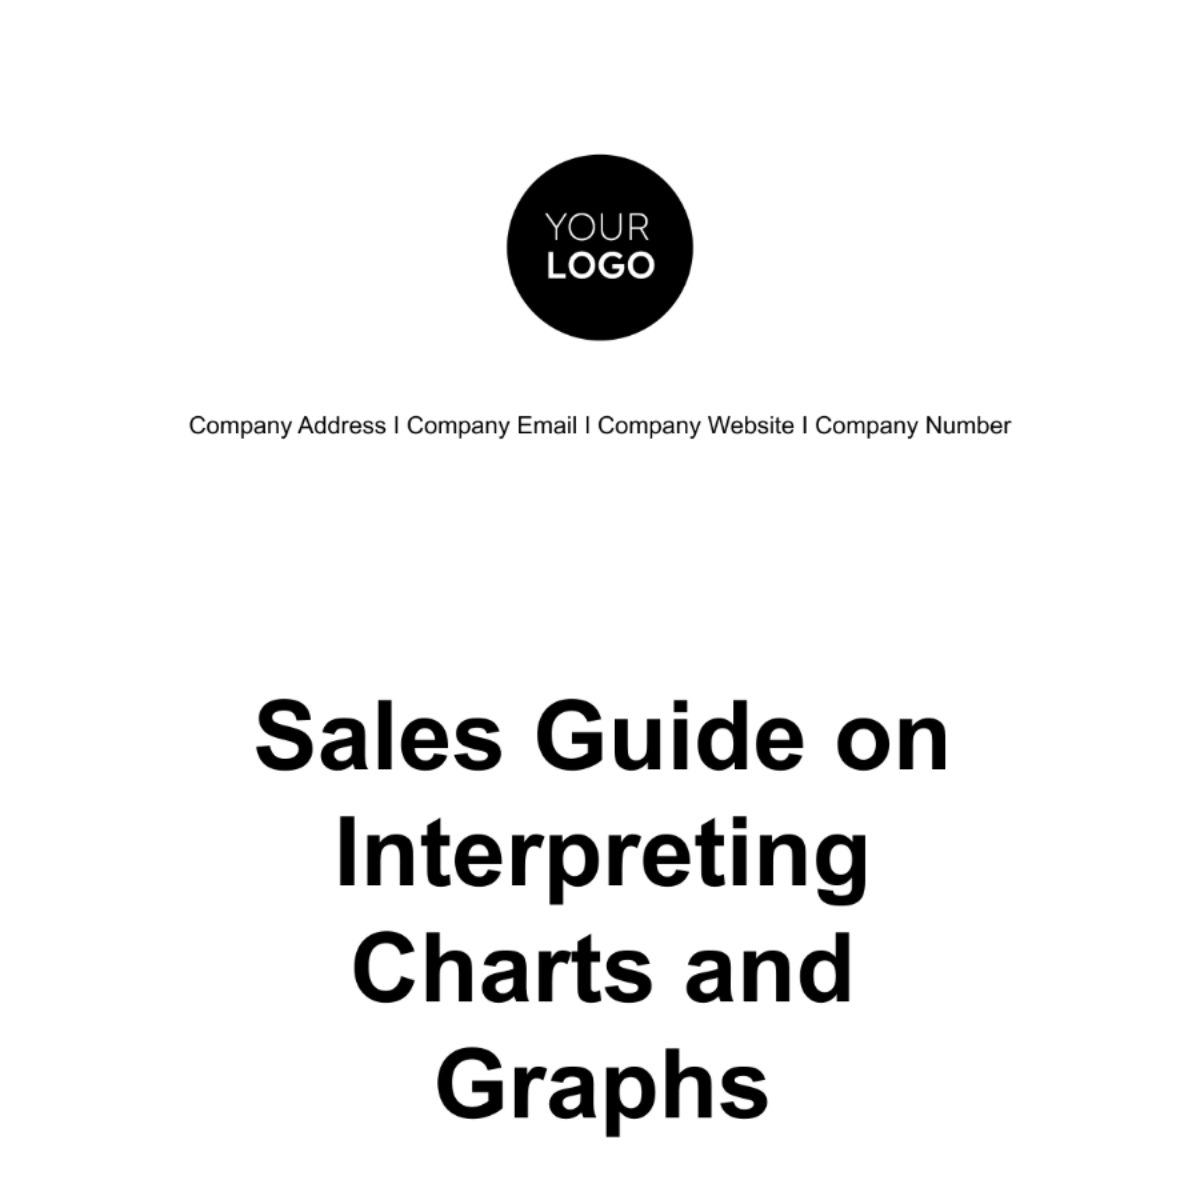 Free Sales Guide on Interpreting Charts and Graphs Template